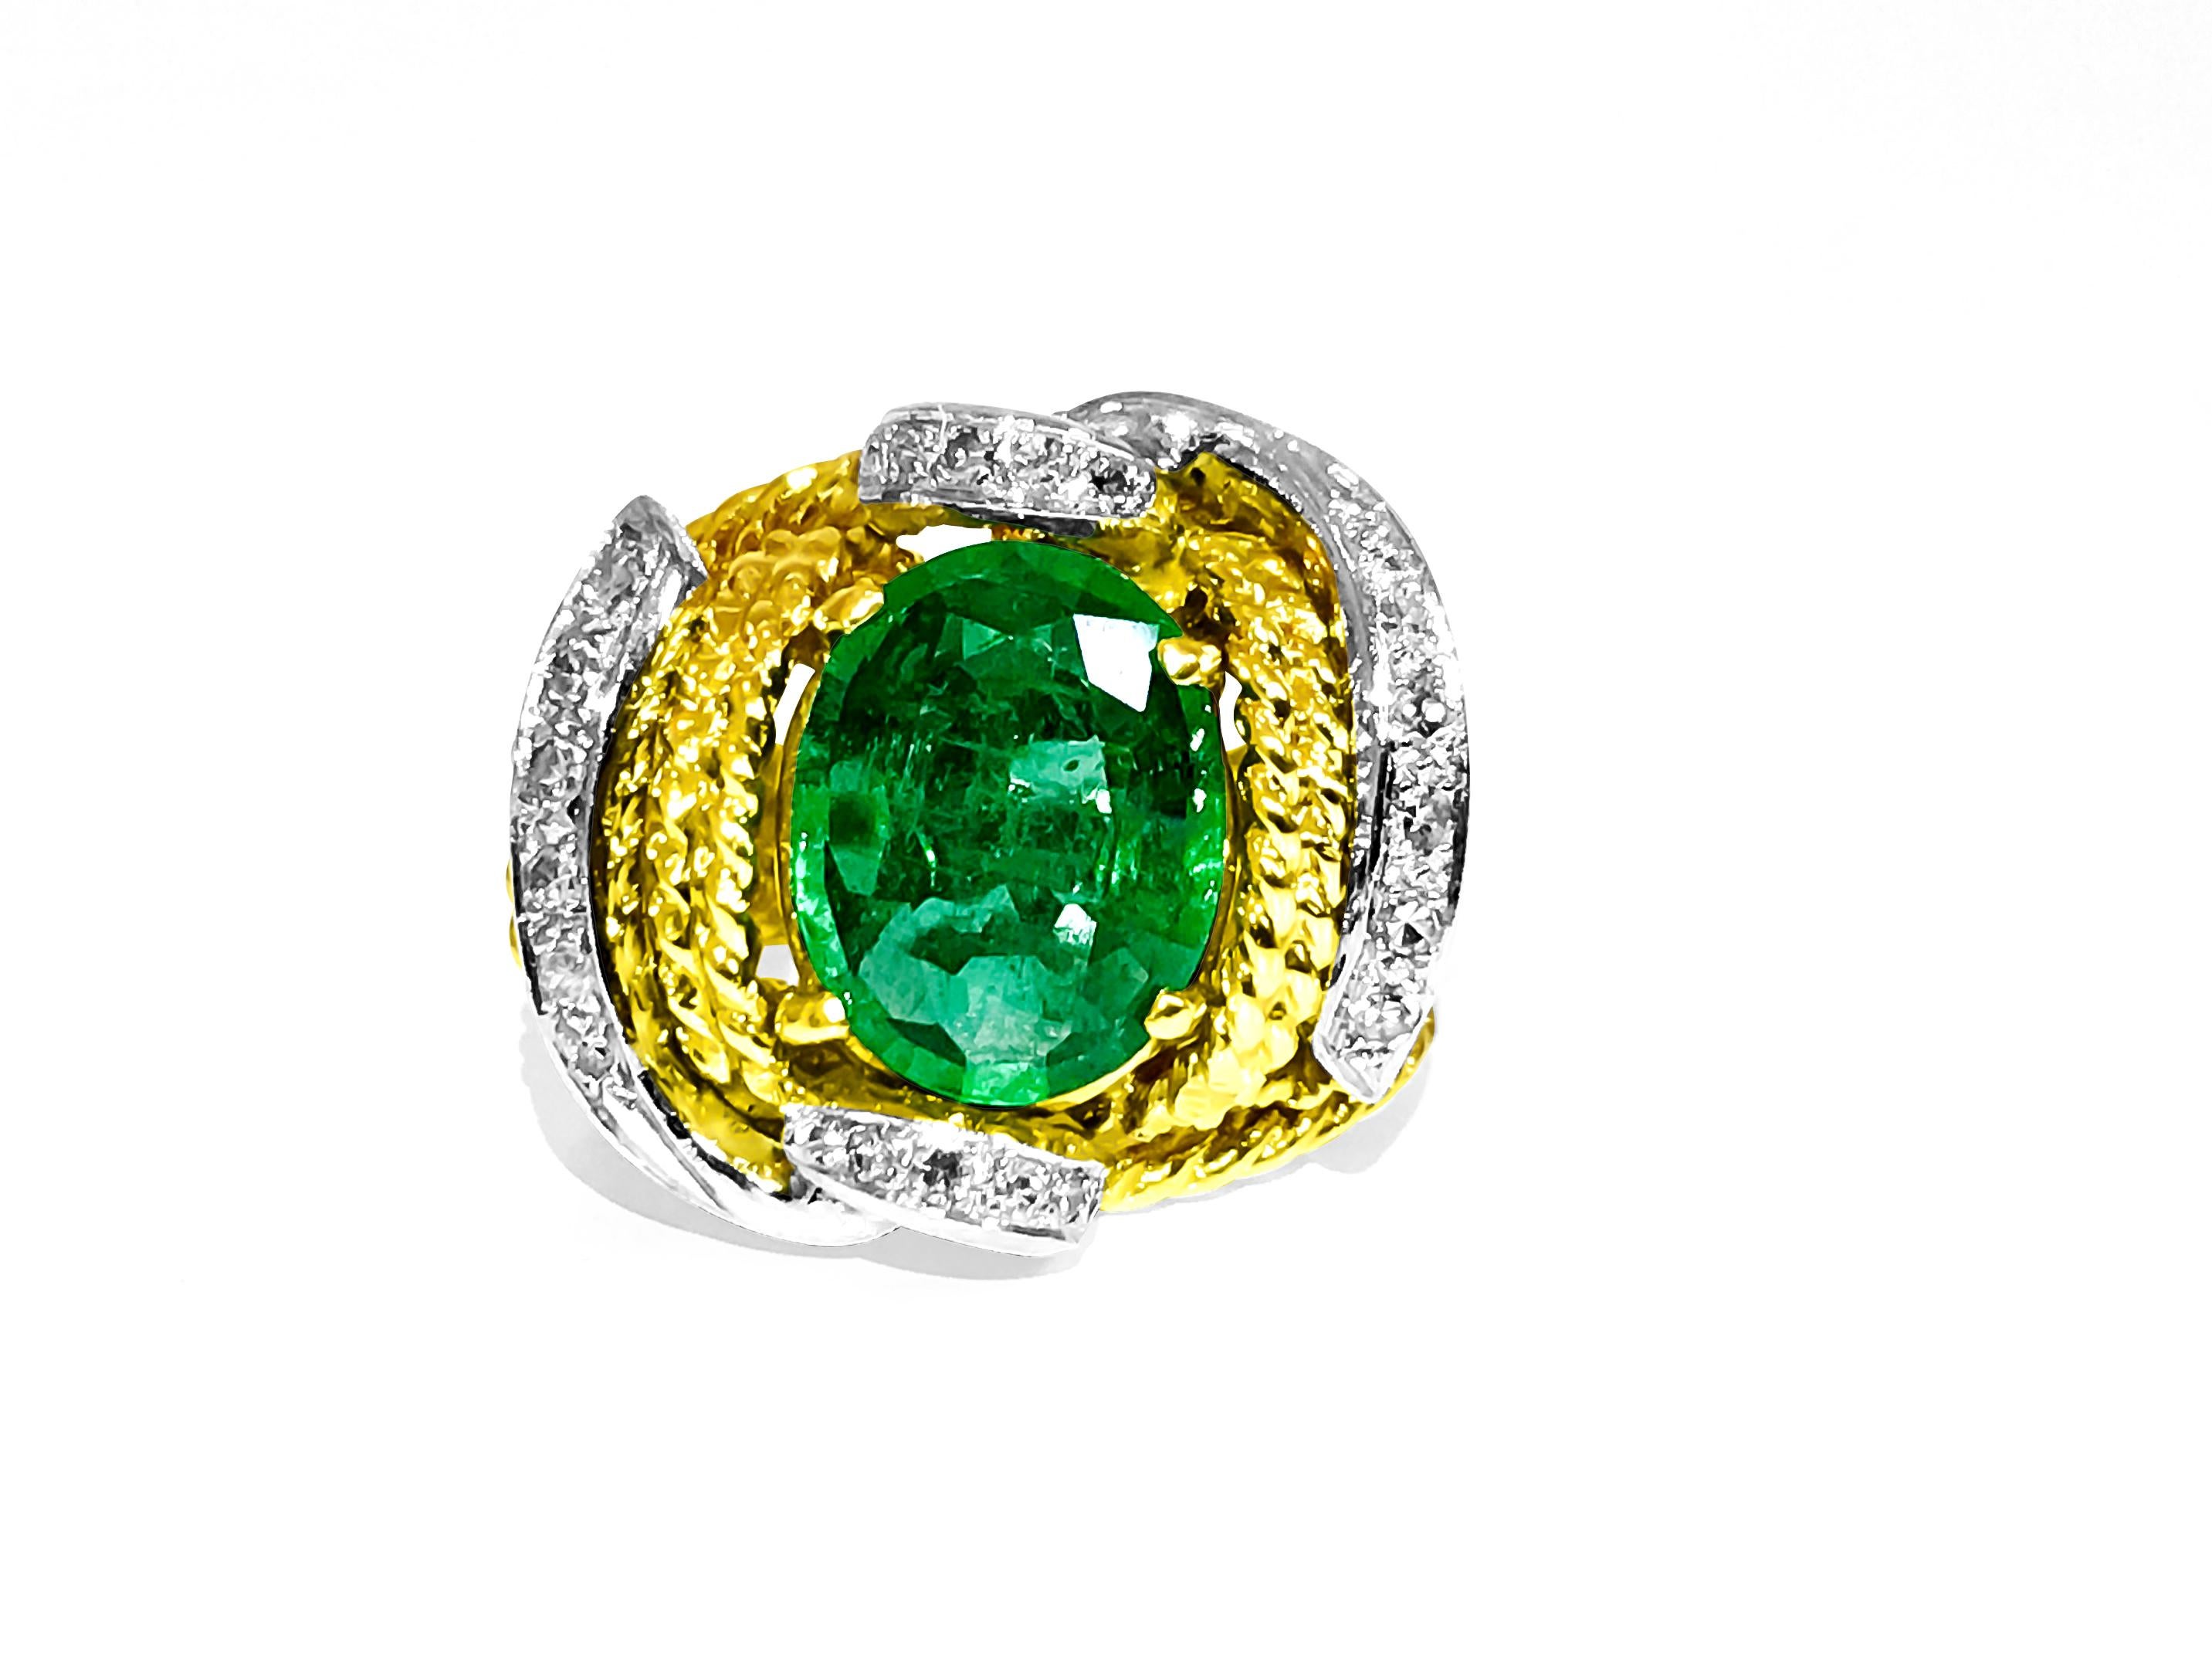 18K Yellow and White Gold (Two Tone). 
3.50 Carat Emerald, oval cut set in prongs. Natural earth mined Emerald. 

0.36 Carat diamonds. Natural earth mined diamonds. VS clarity and F-G color, Round brilliant cut. 

Super quality ring. Great making